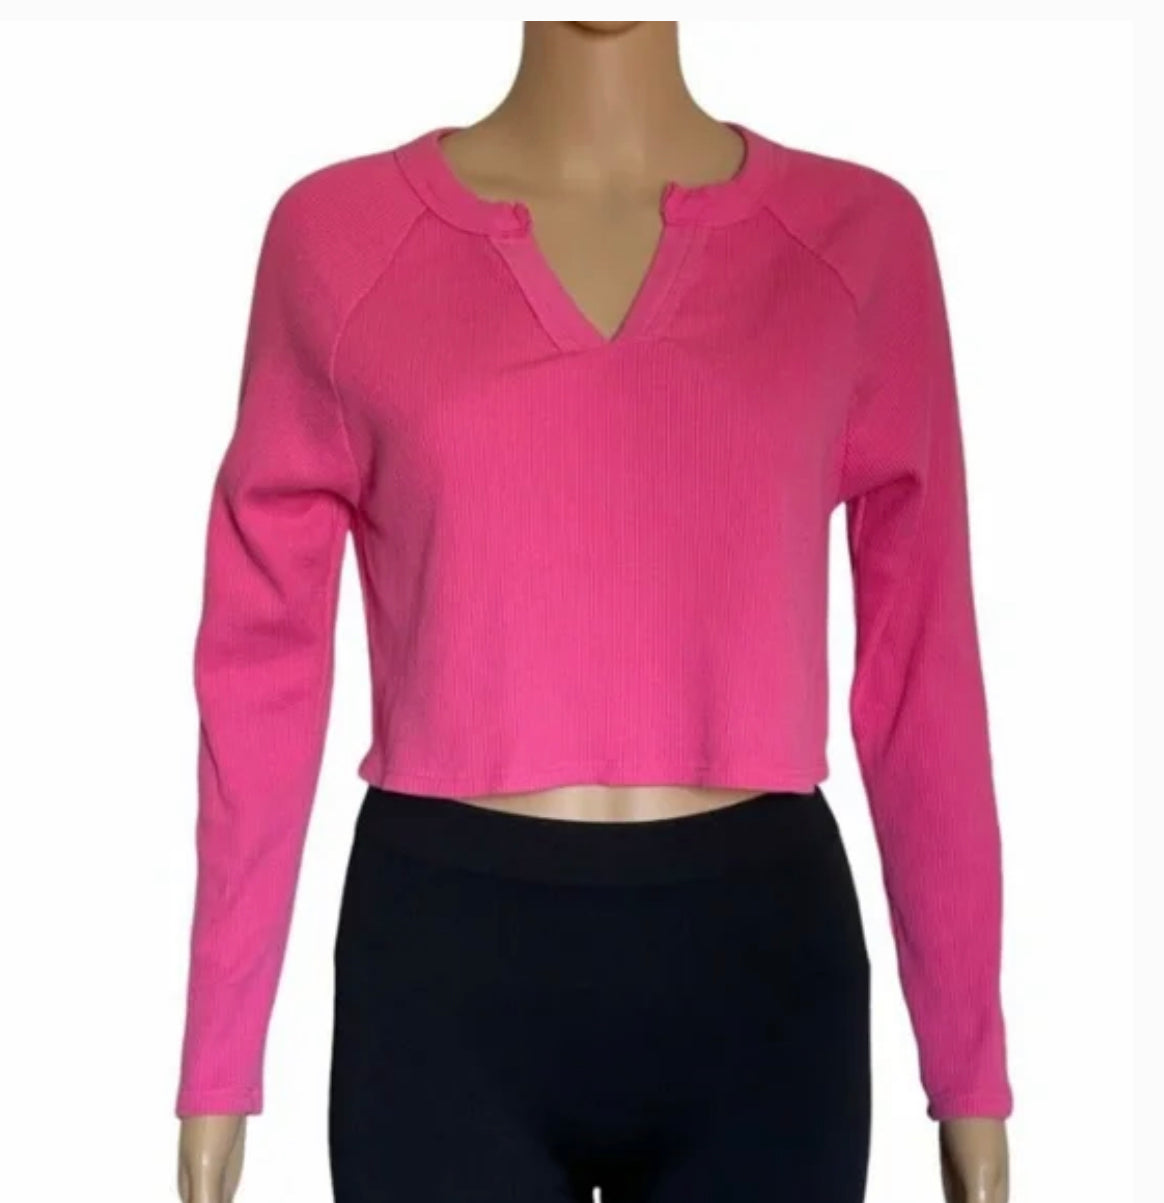 WILD FABLE Hot Pink Large 12 / 14 Casual Wear Long Sleeve Cropped Top NEW  NWT on eBid New Zealand